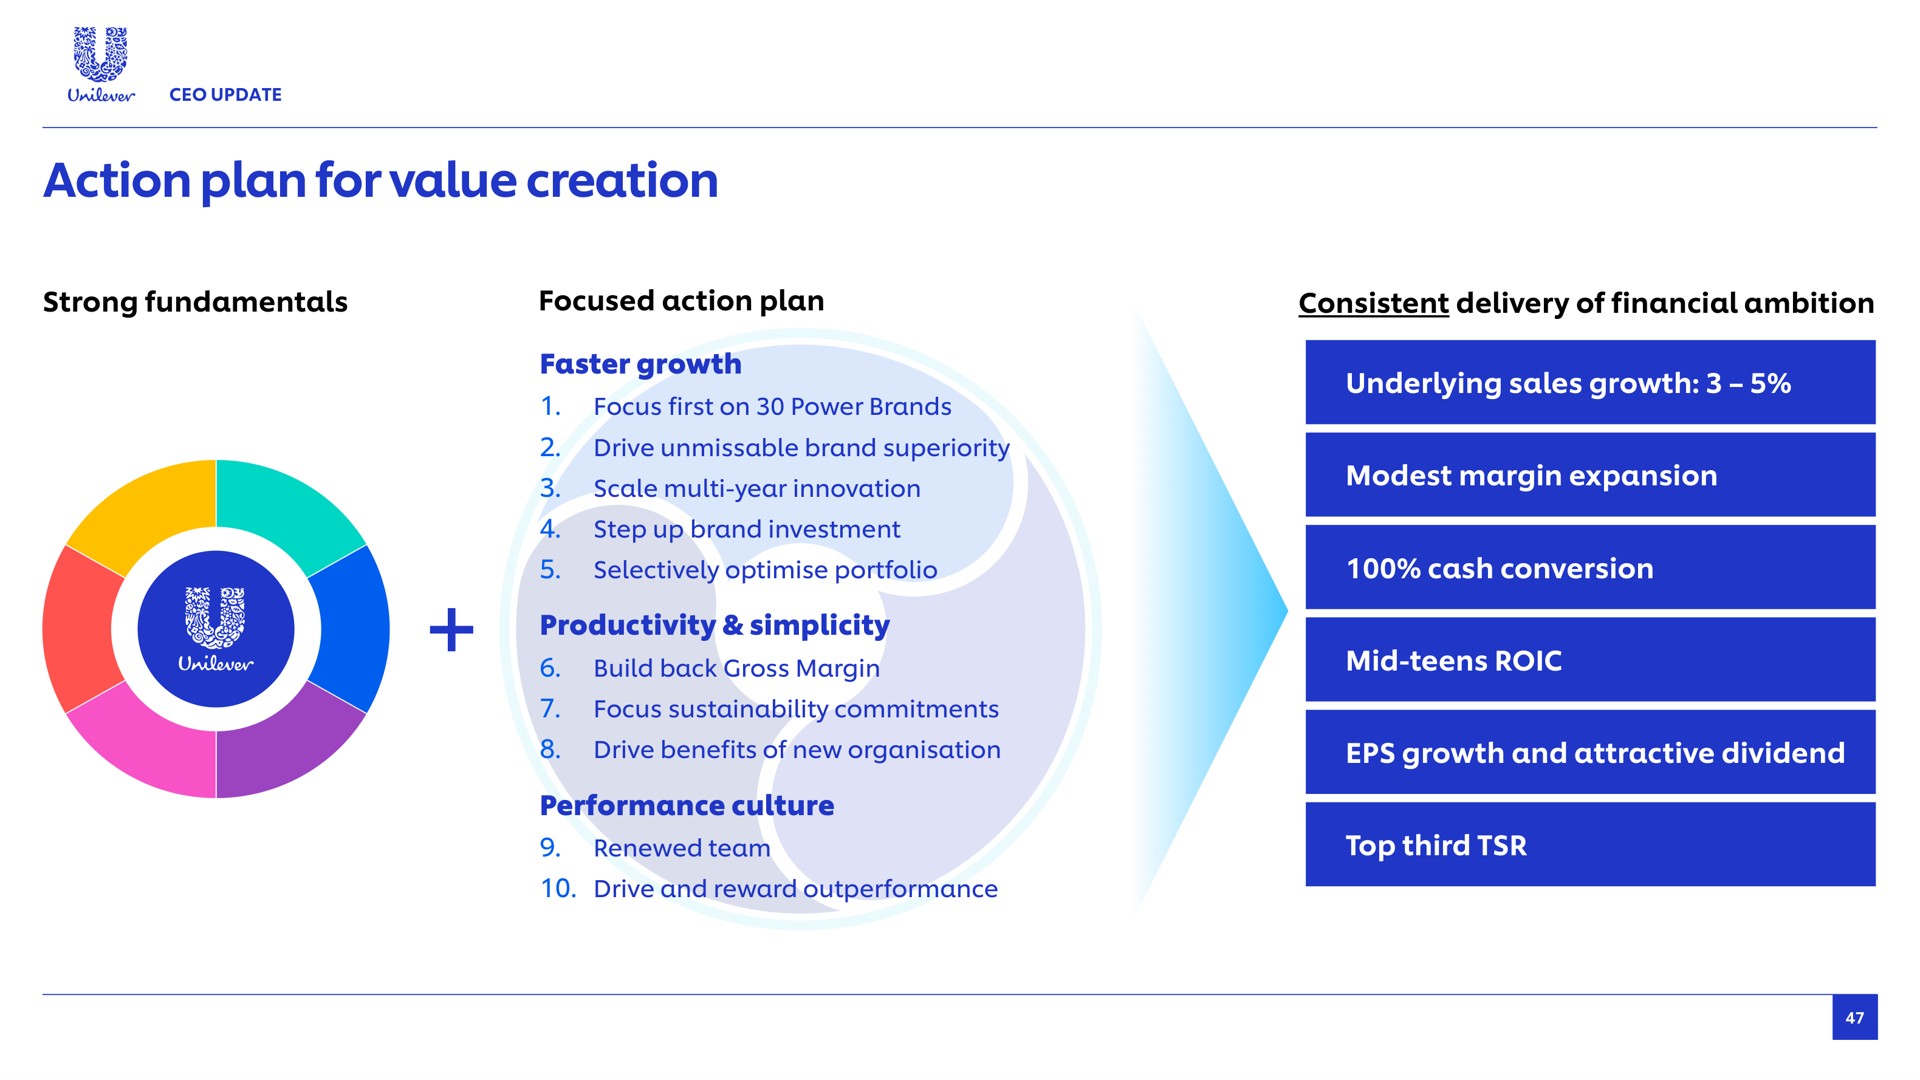 action plan for value creation strong fundamentals focused consistent delivery of financial ambition faster growth focus first on power brands drive unmissable brand superiority scale year innovation step up brand investment selectively portfolio productivity simplicity build back gross margin focus commitments drive benefits of new performance culture renewed team drive and reward underlying sales growth modest margin expansion cash conversion mid teens growth and attractive dividend top third | Unilever